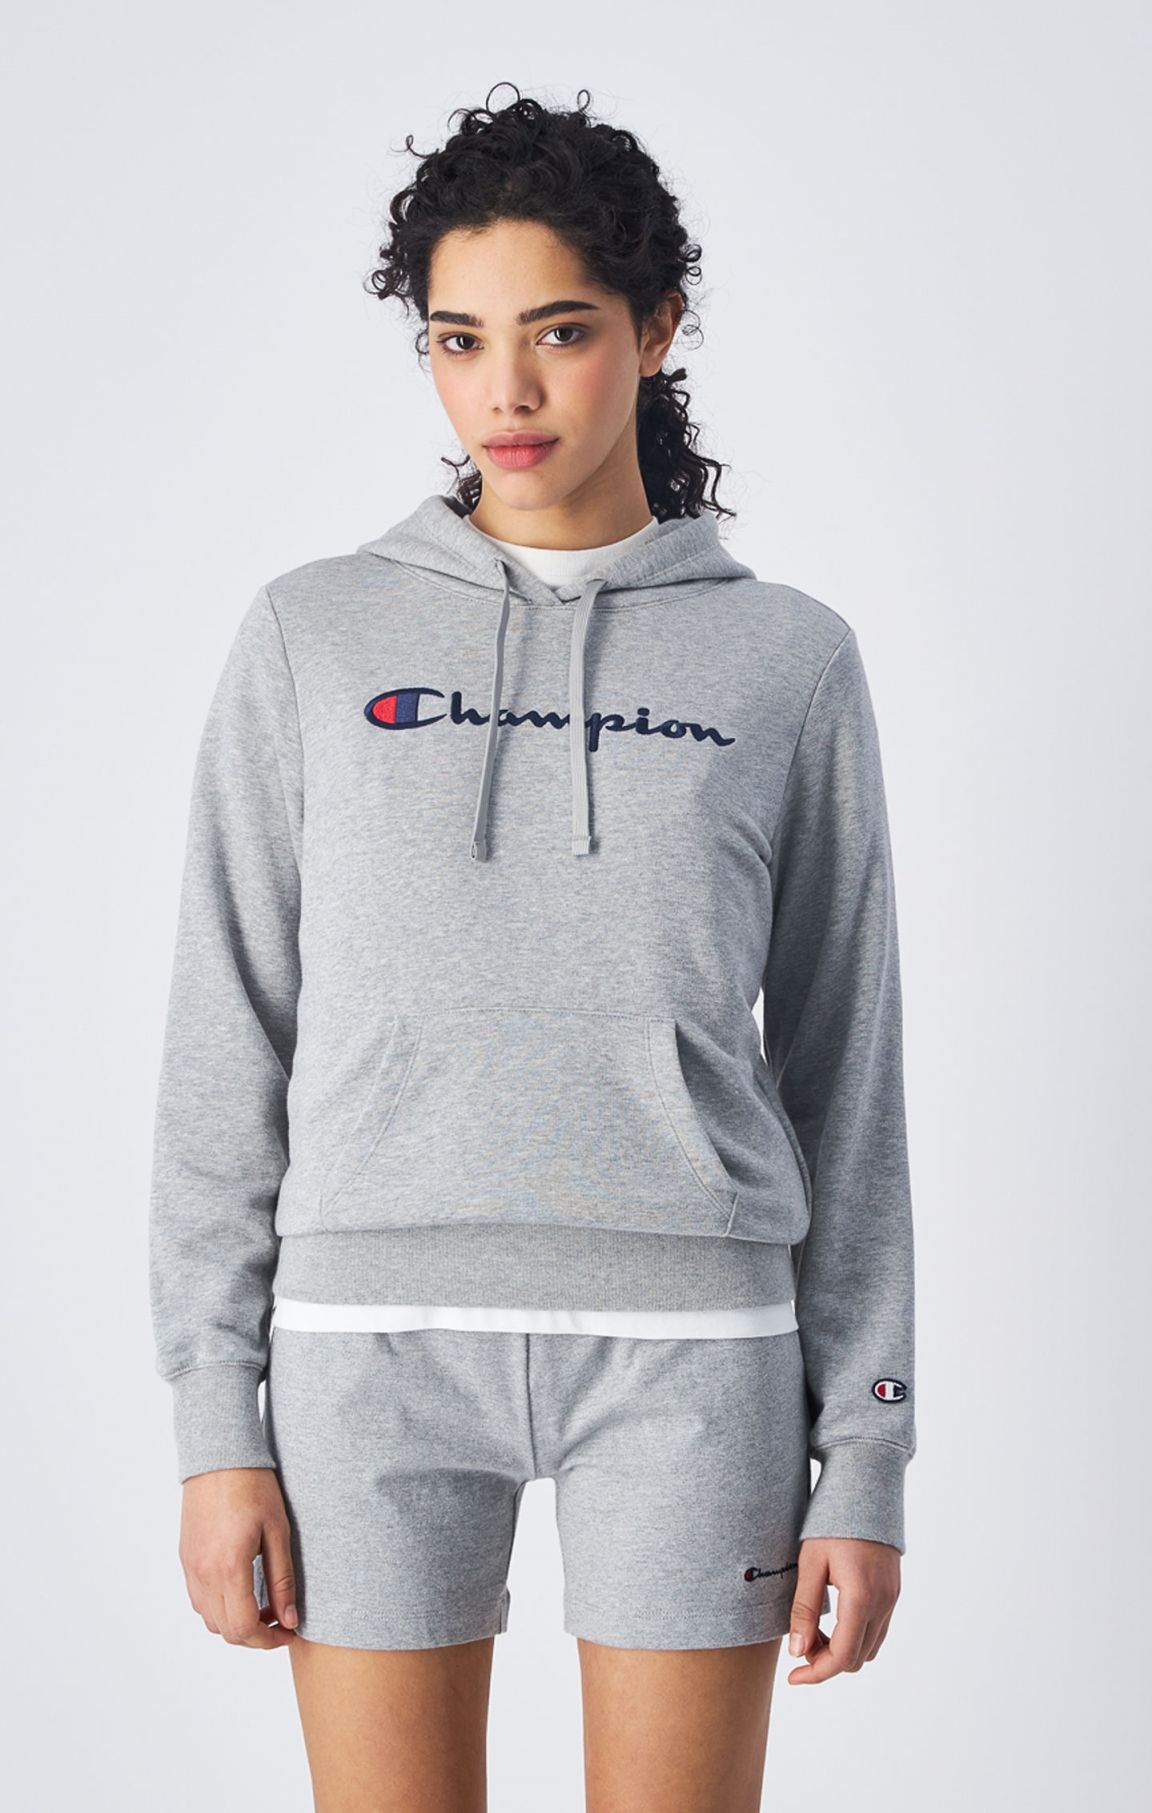 Champion, Soft Touch, Pullover Sweatshirt with Drawstring, Crew for Women,  Black C Logo, X-Small at  Women's Clothing store